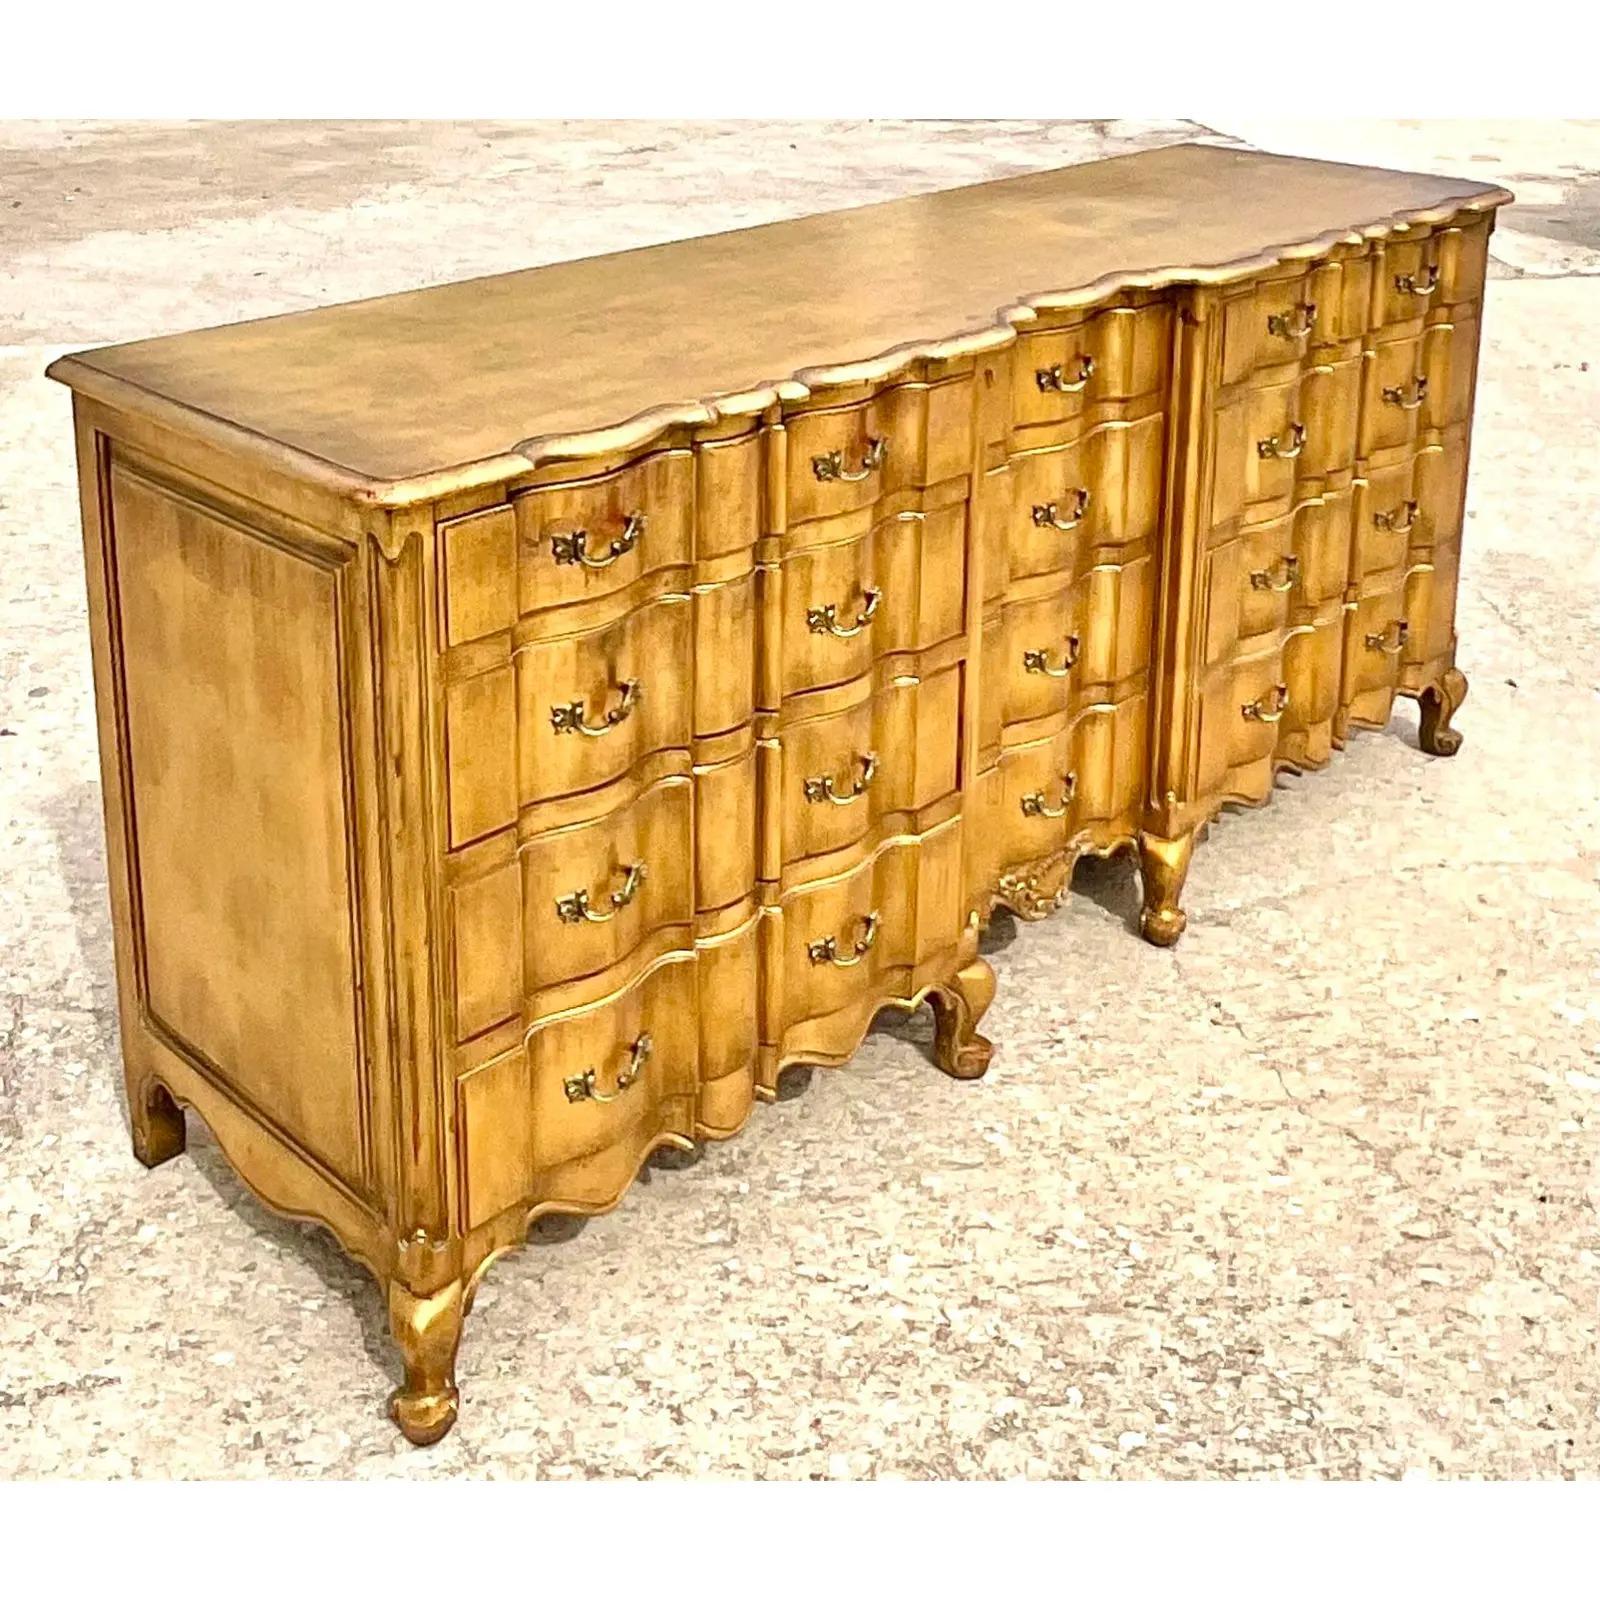 Fabulous vintage Regency dresser. A chic wave front design in a bright all over gilt finish. Sure to add a glass of drama to any space. Acquired from a Palm Beach estate.